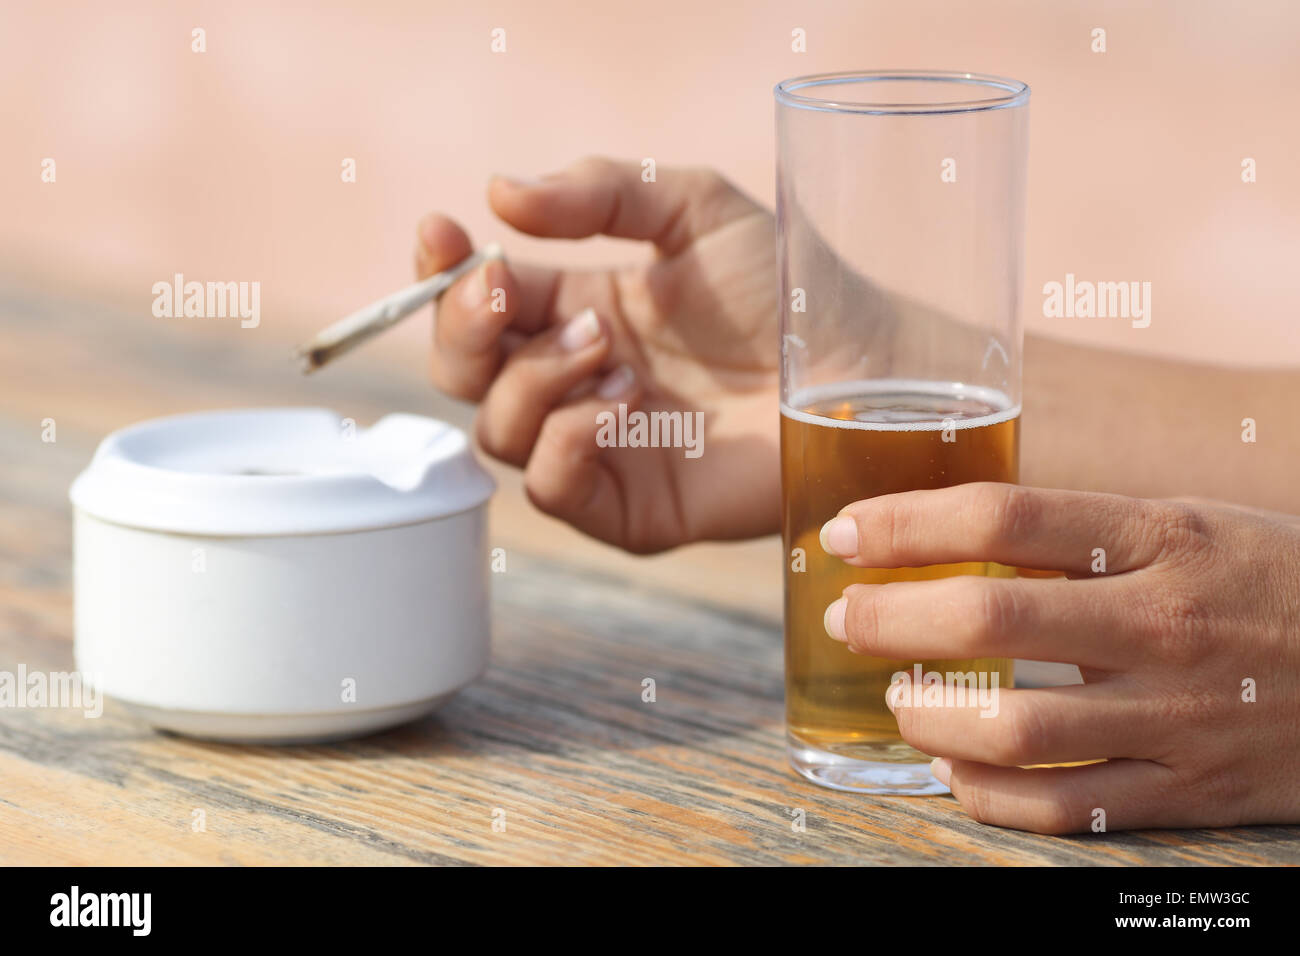 Woman hands holding a cigarette smoking and drinking alcohol in a bar table Stock Photo